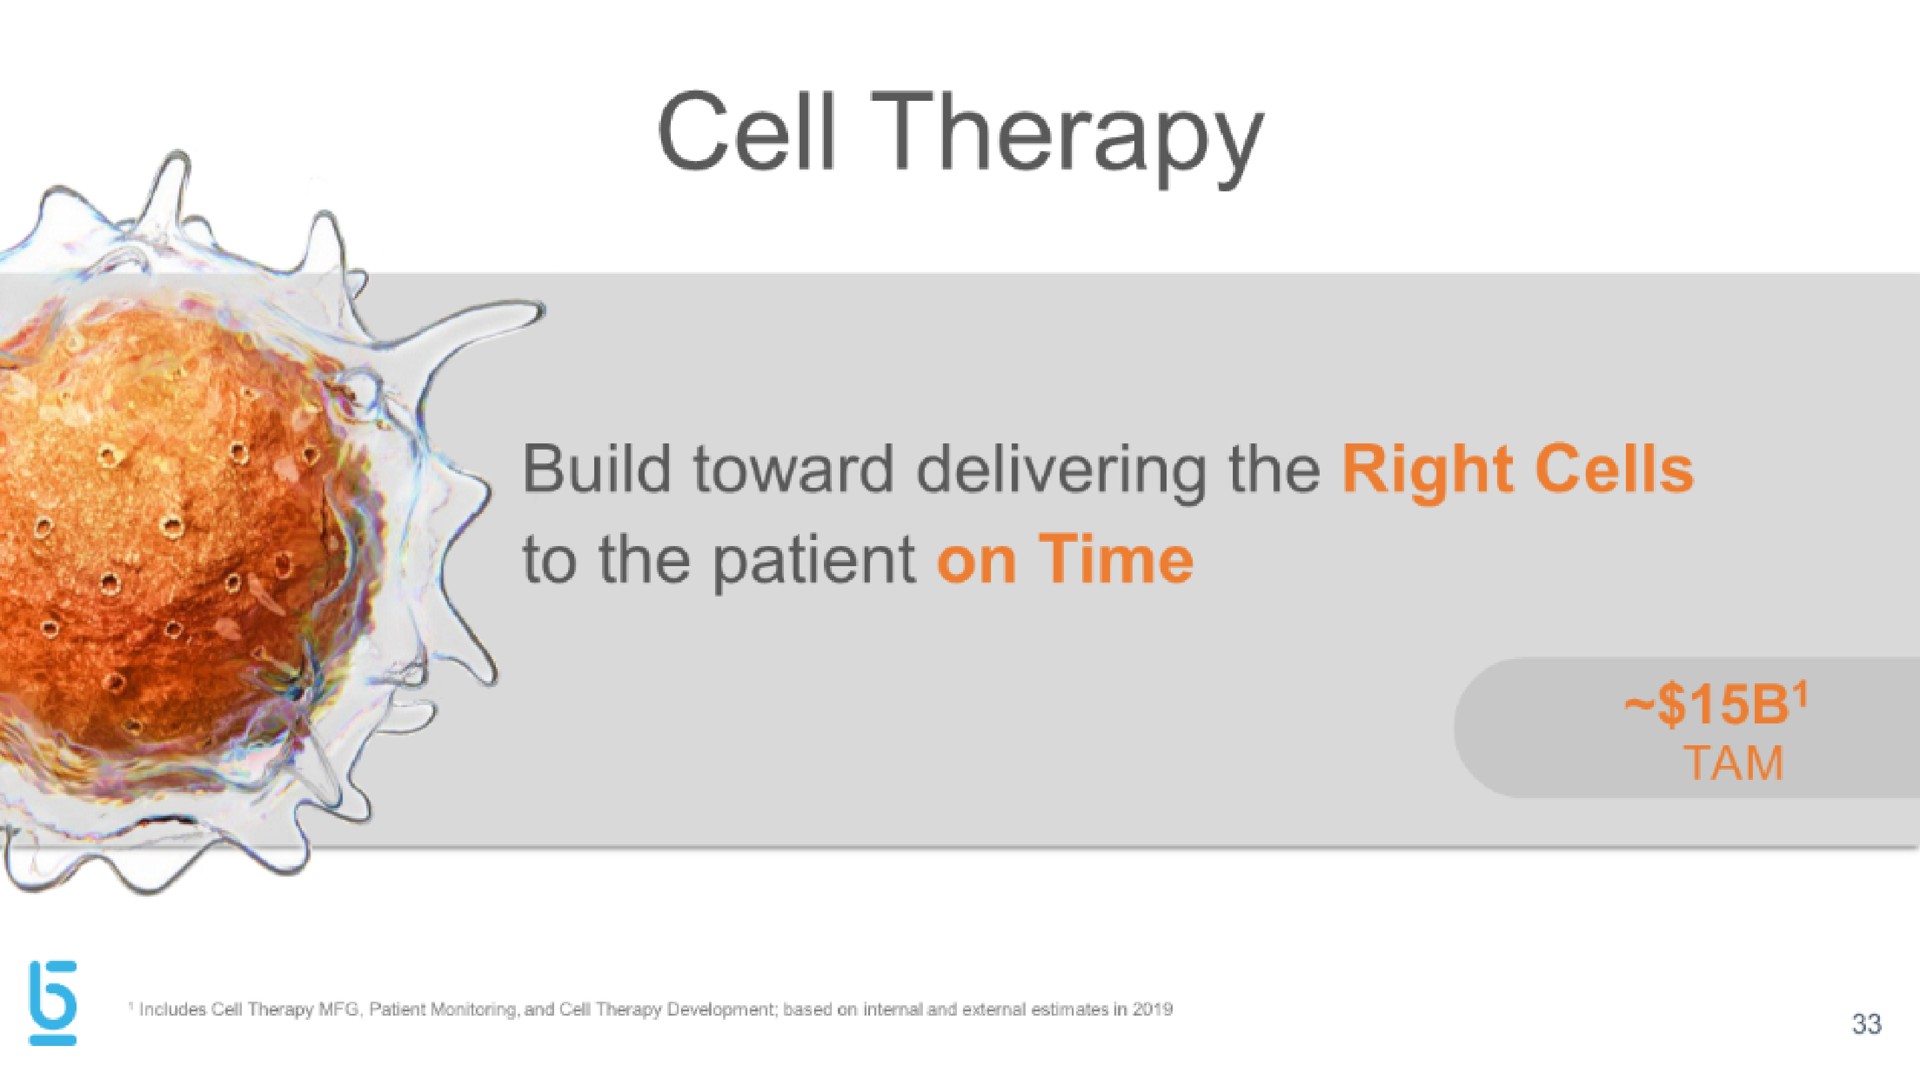 cell therapy build toward delivering the right cells to the patient on time tam | Berkeley Lights